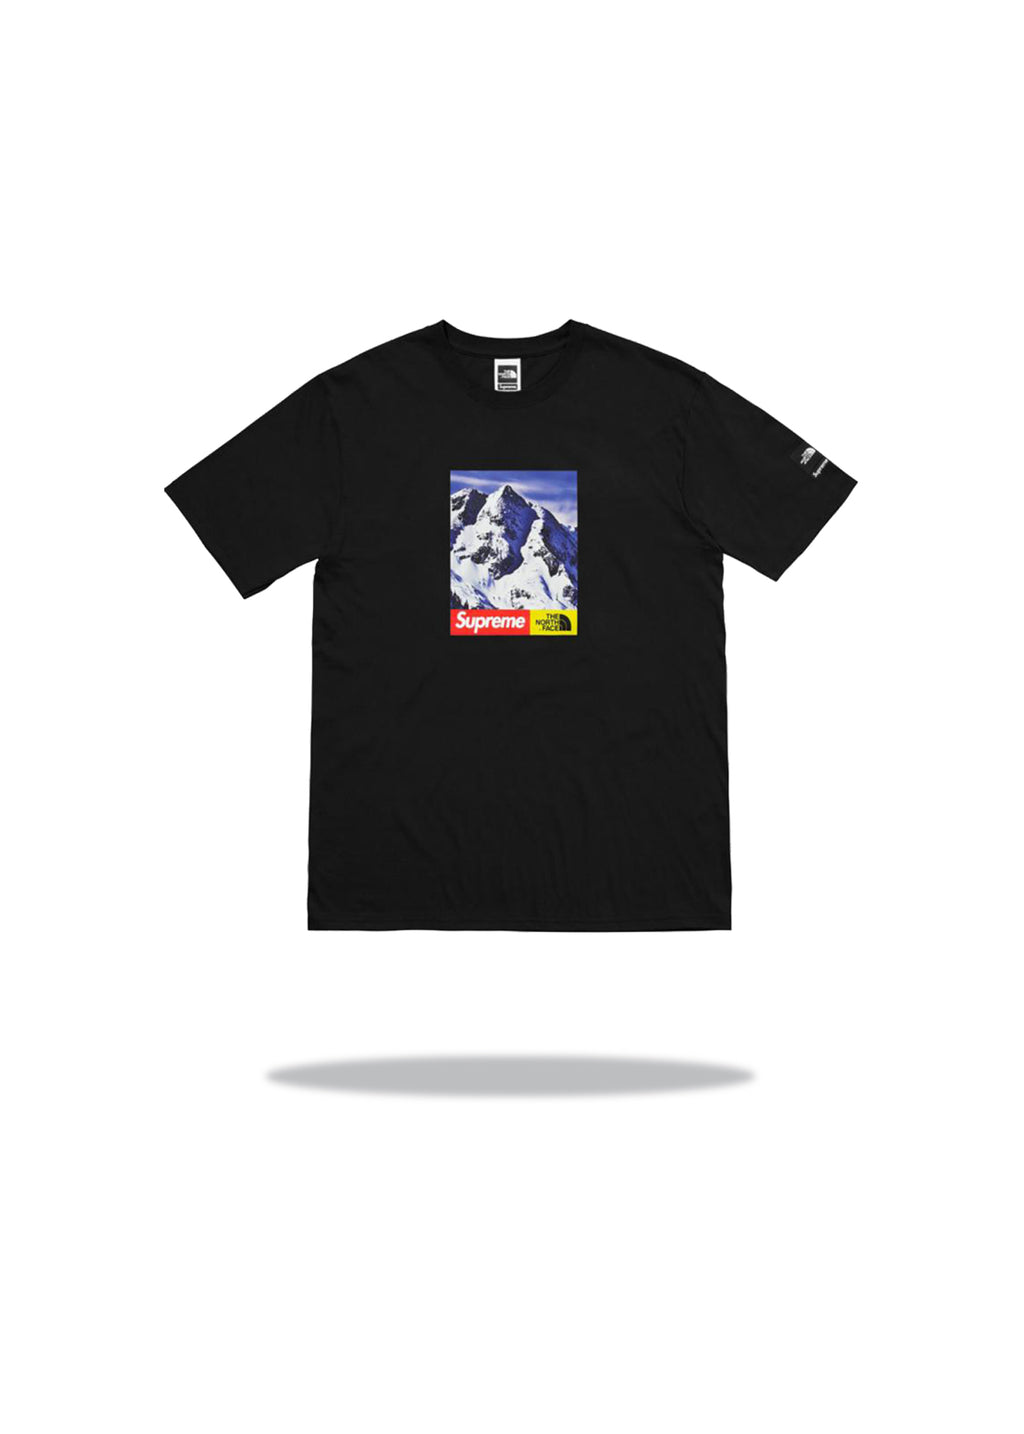 Supreme x The North Face Mountain Tee Black